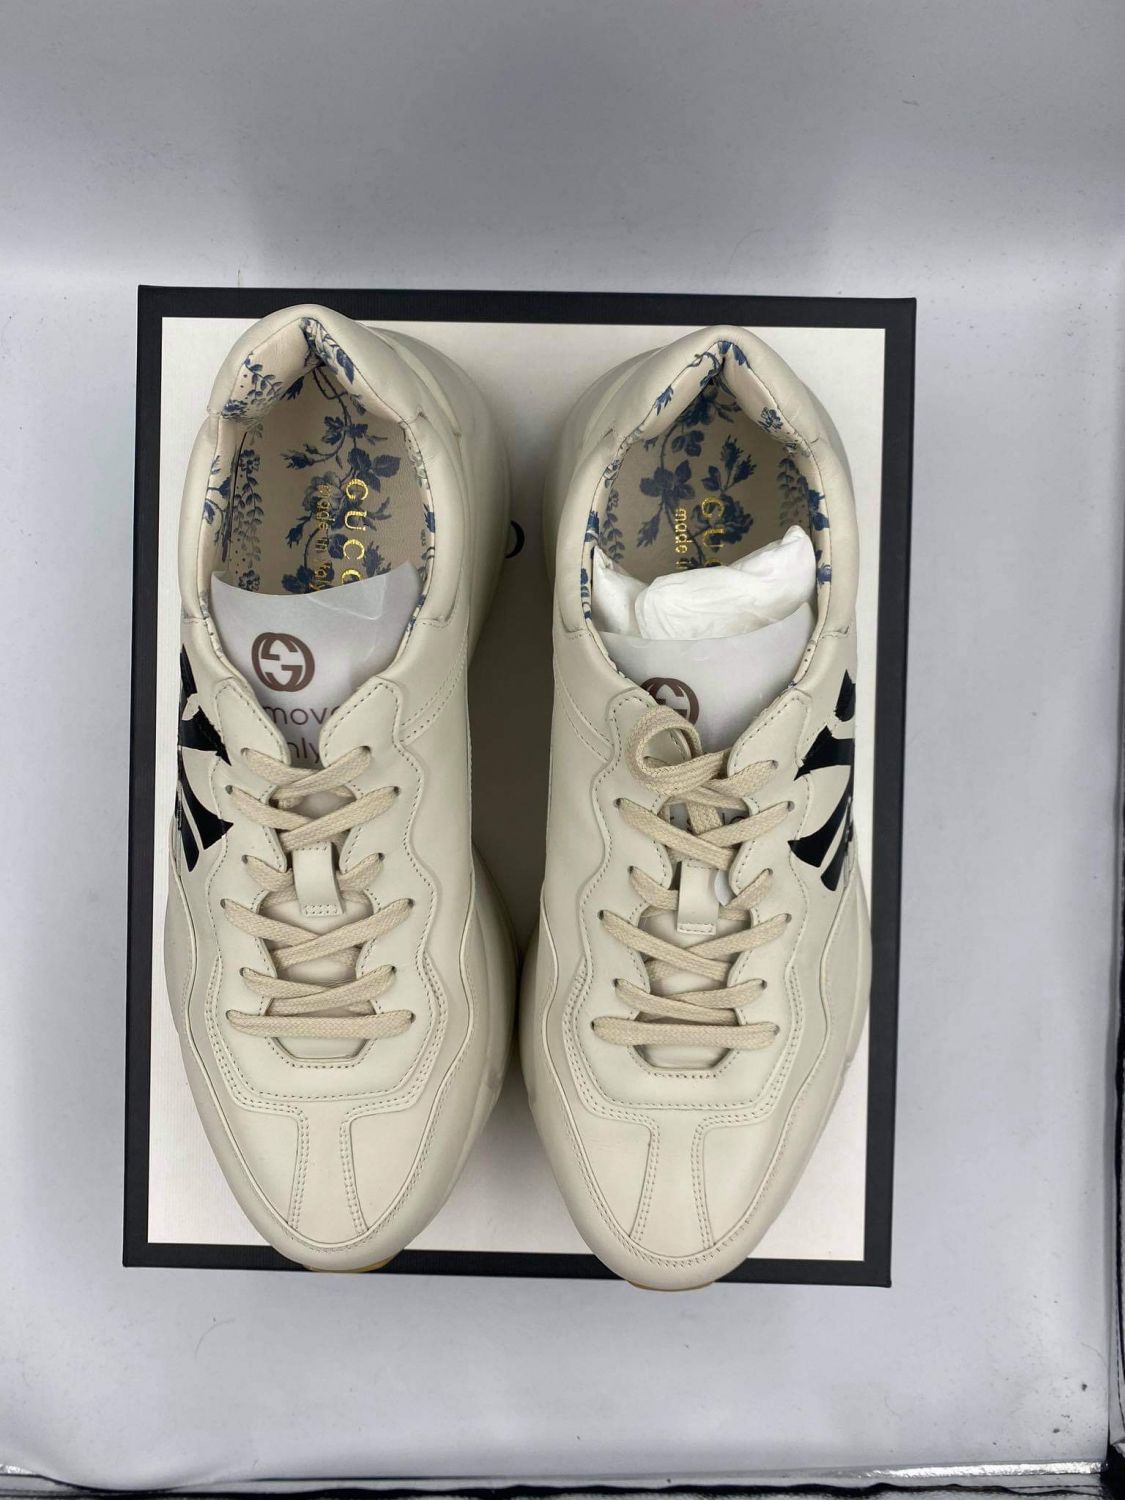 Buy Gucci Rhyton Leather Sneaker 'NY Yankees' - 548638 DRW00 9022 - White